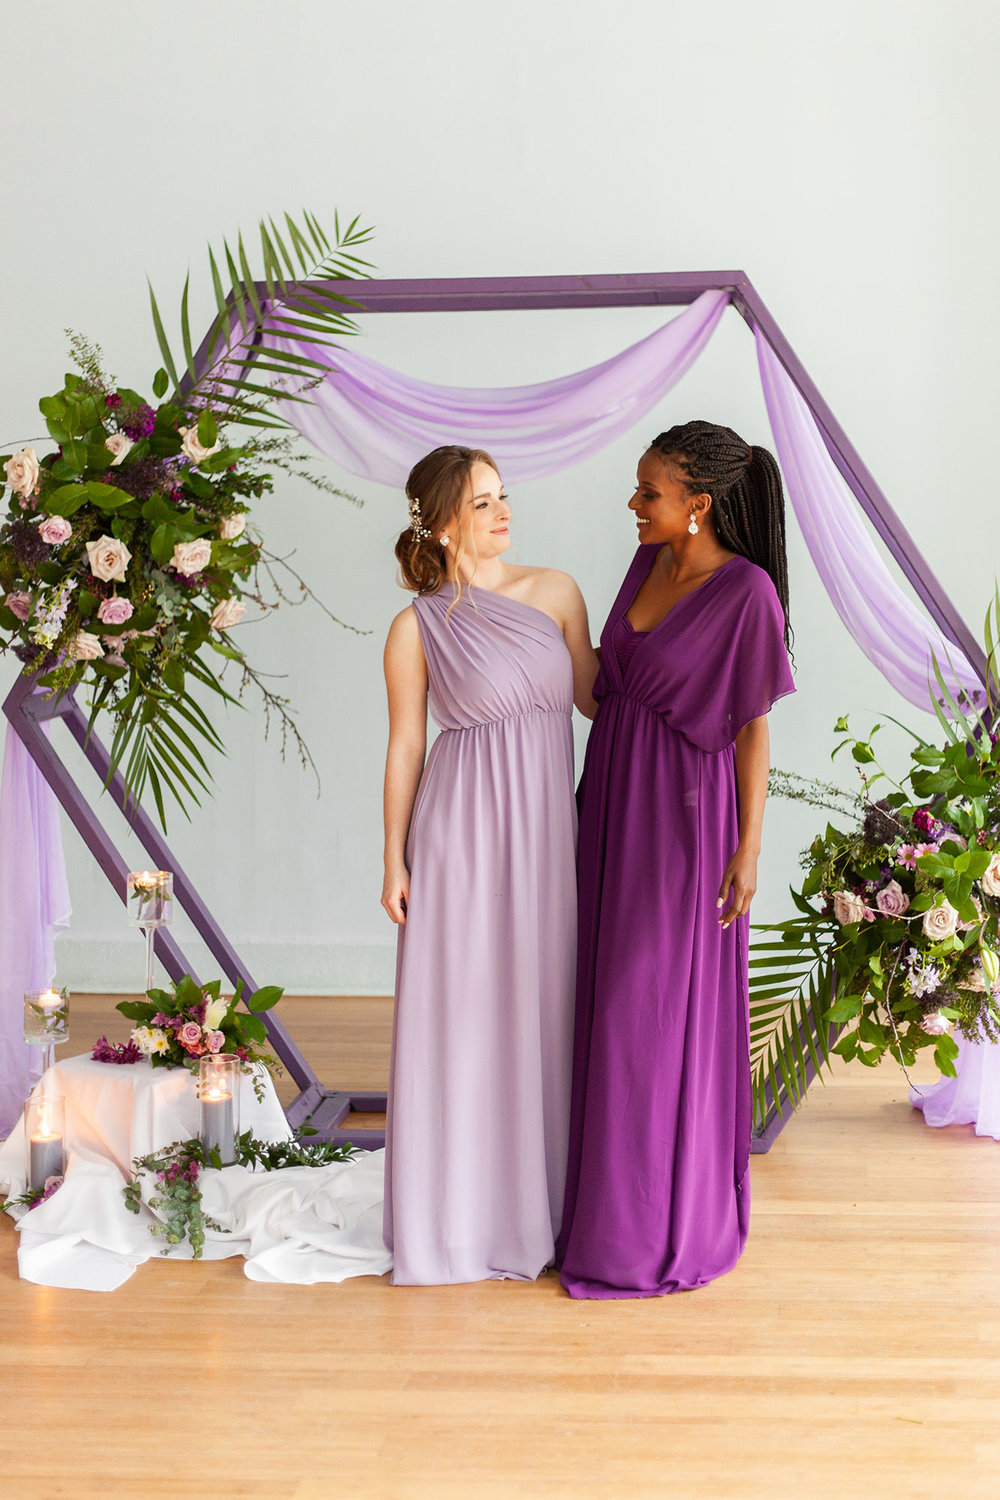 Henkaa fall wedding collection with bridesmaids in purple dresses